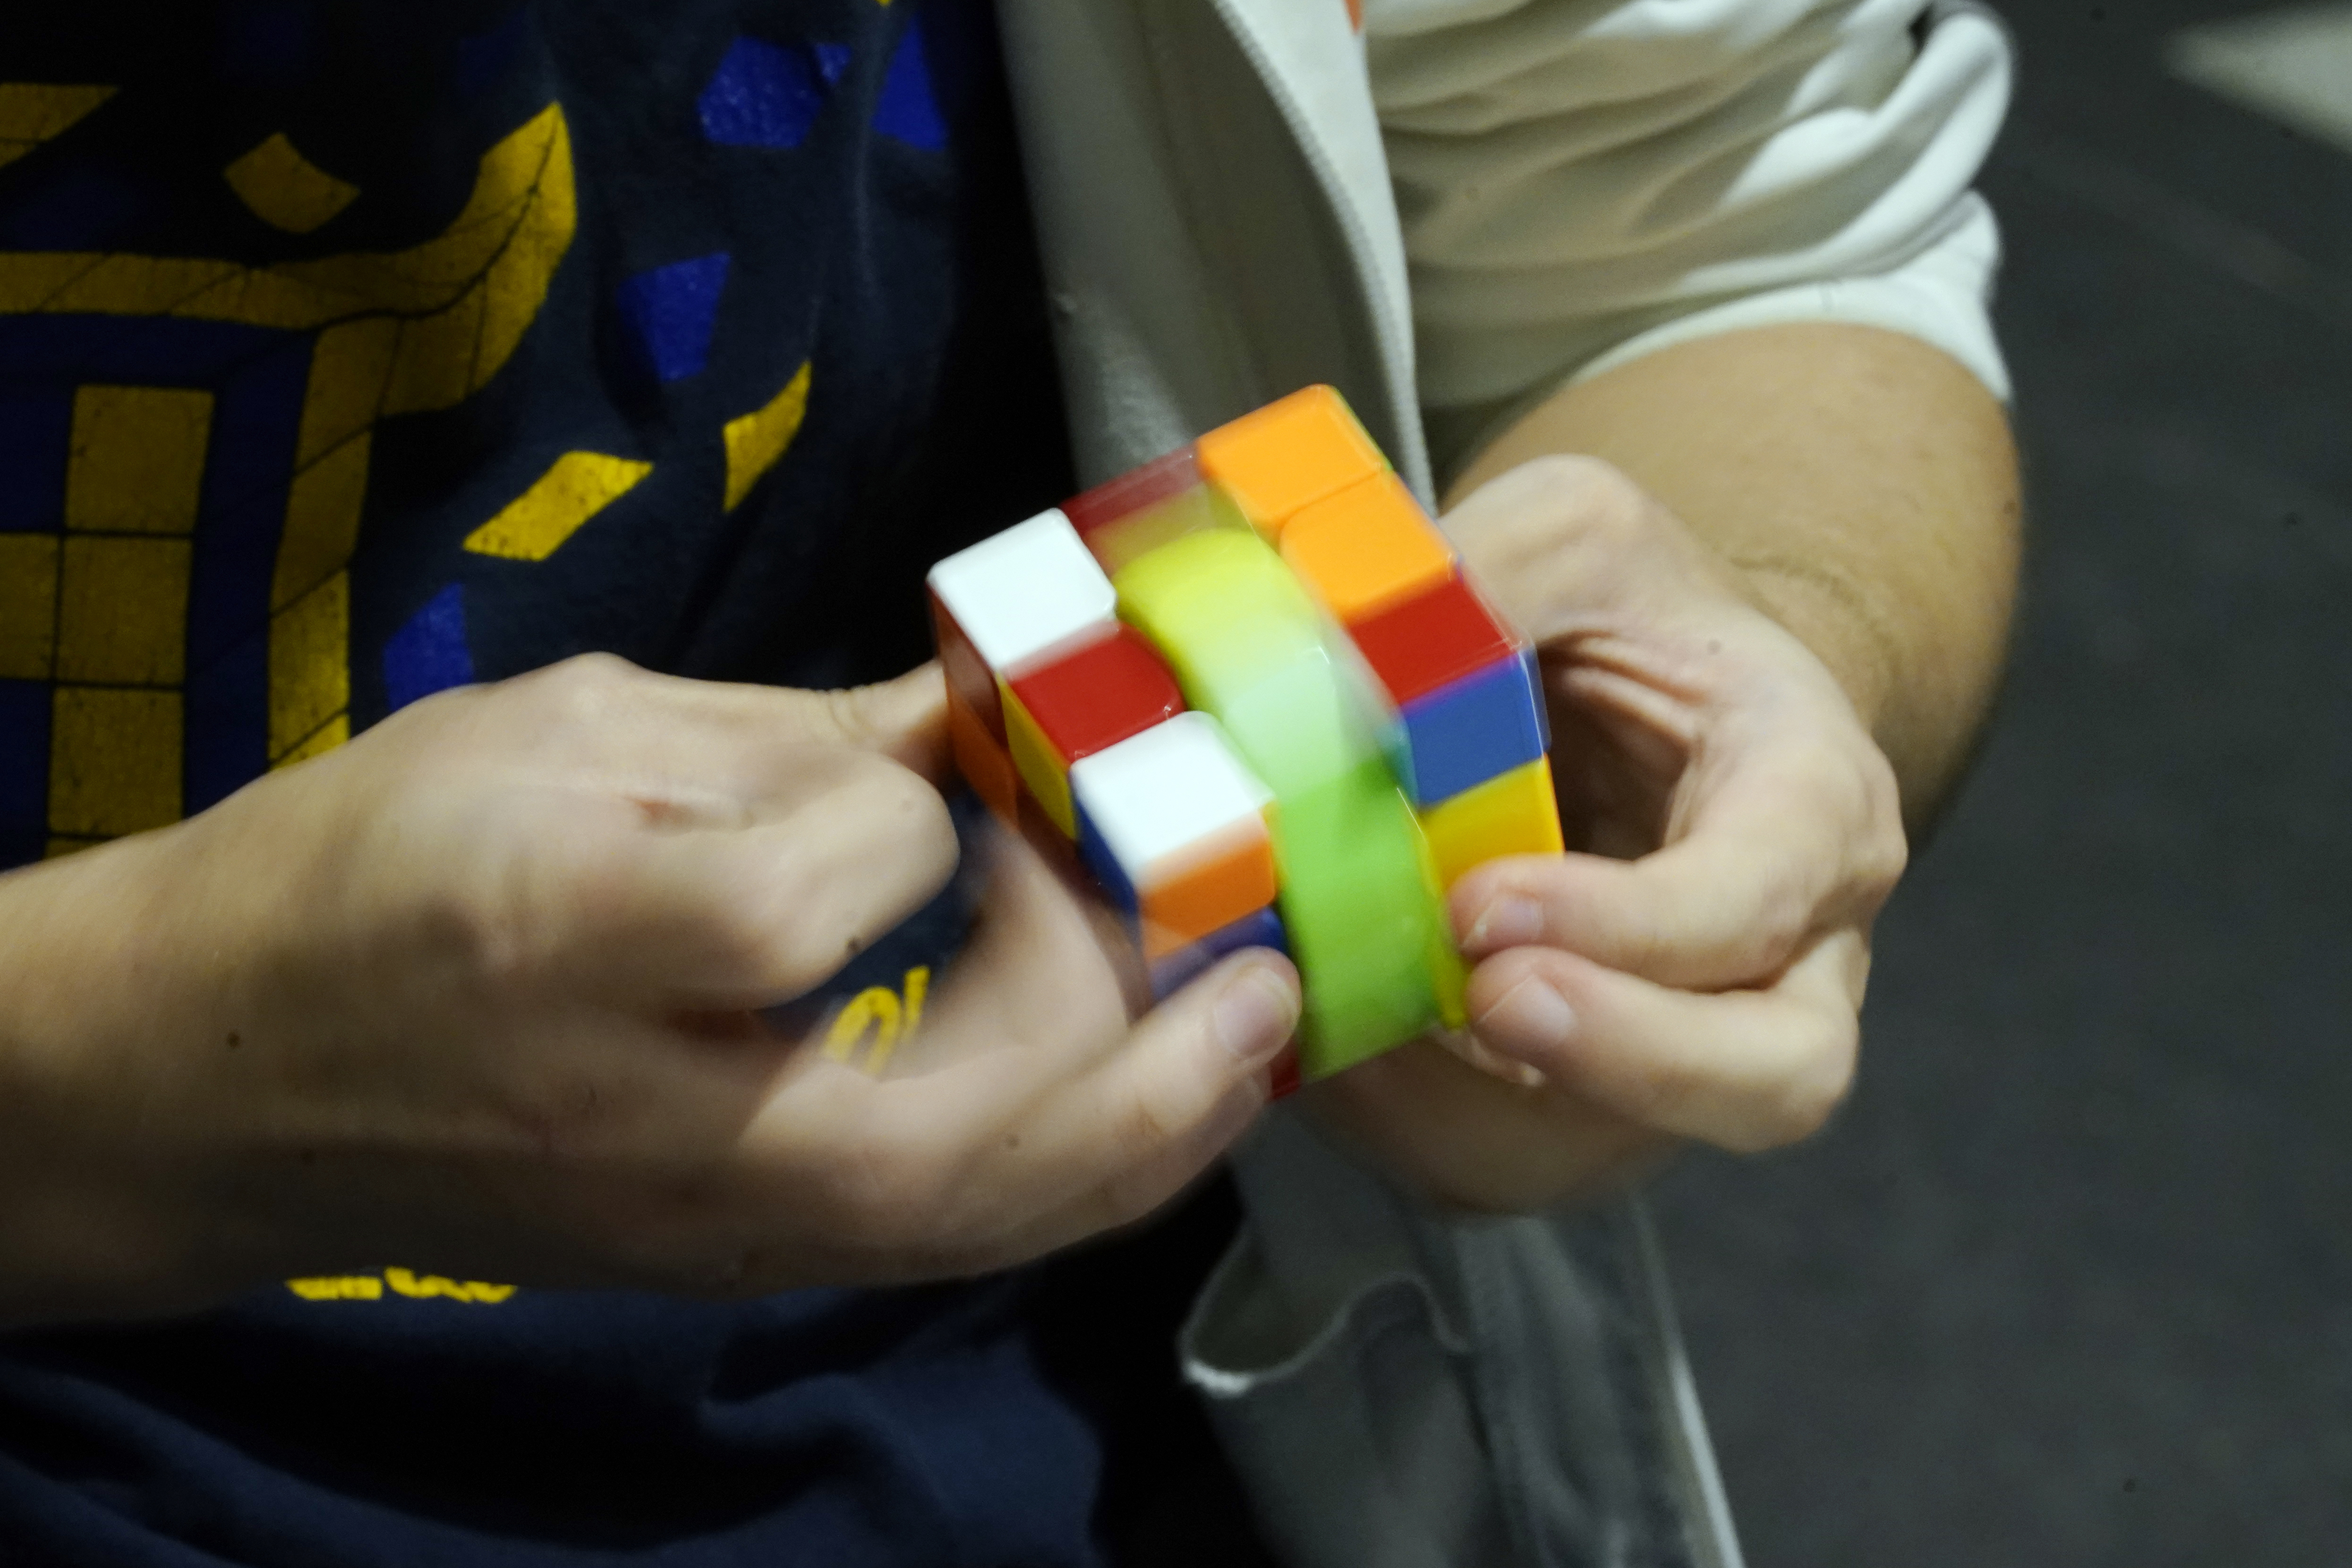 The mystery of Maroubra's Rubik's Cube has been solved but locals